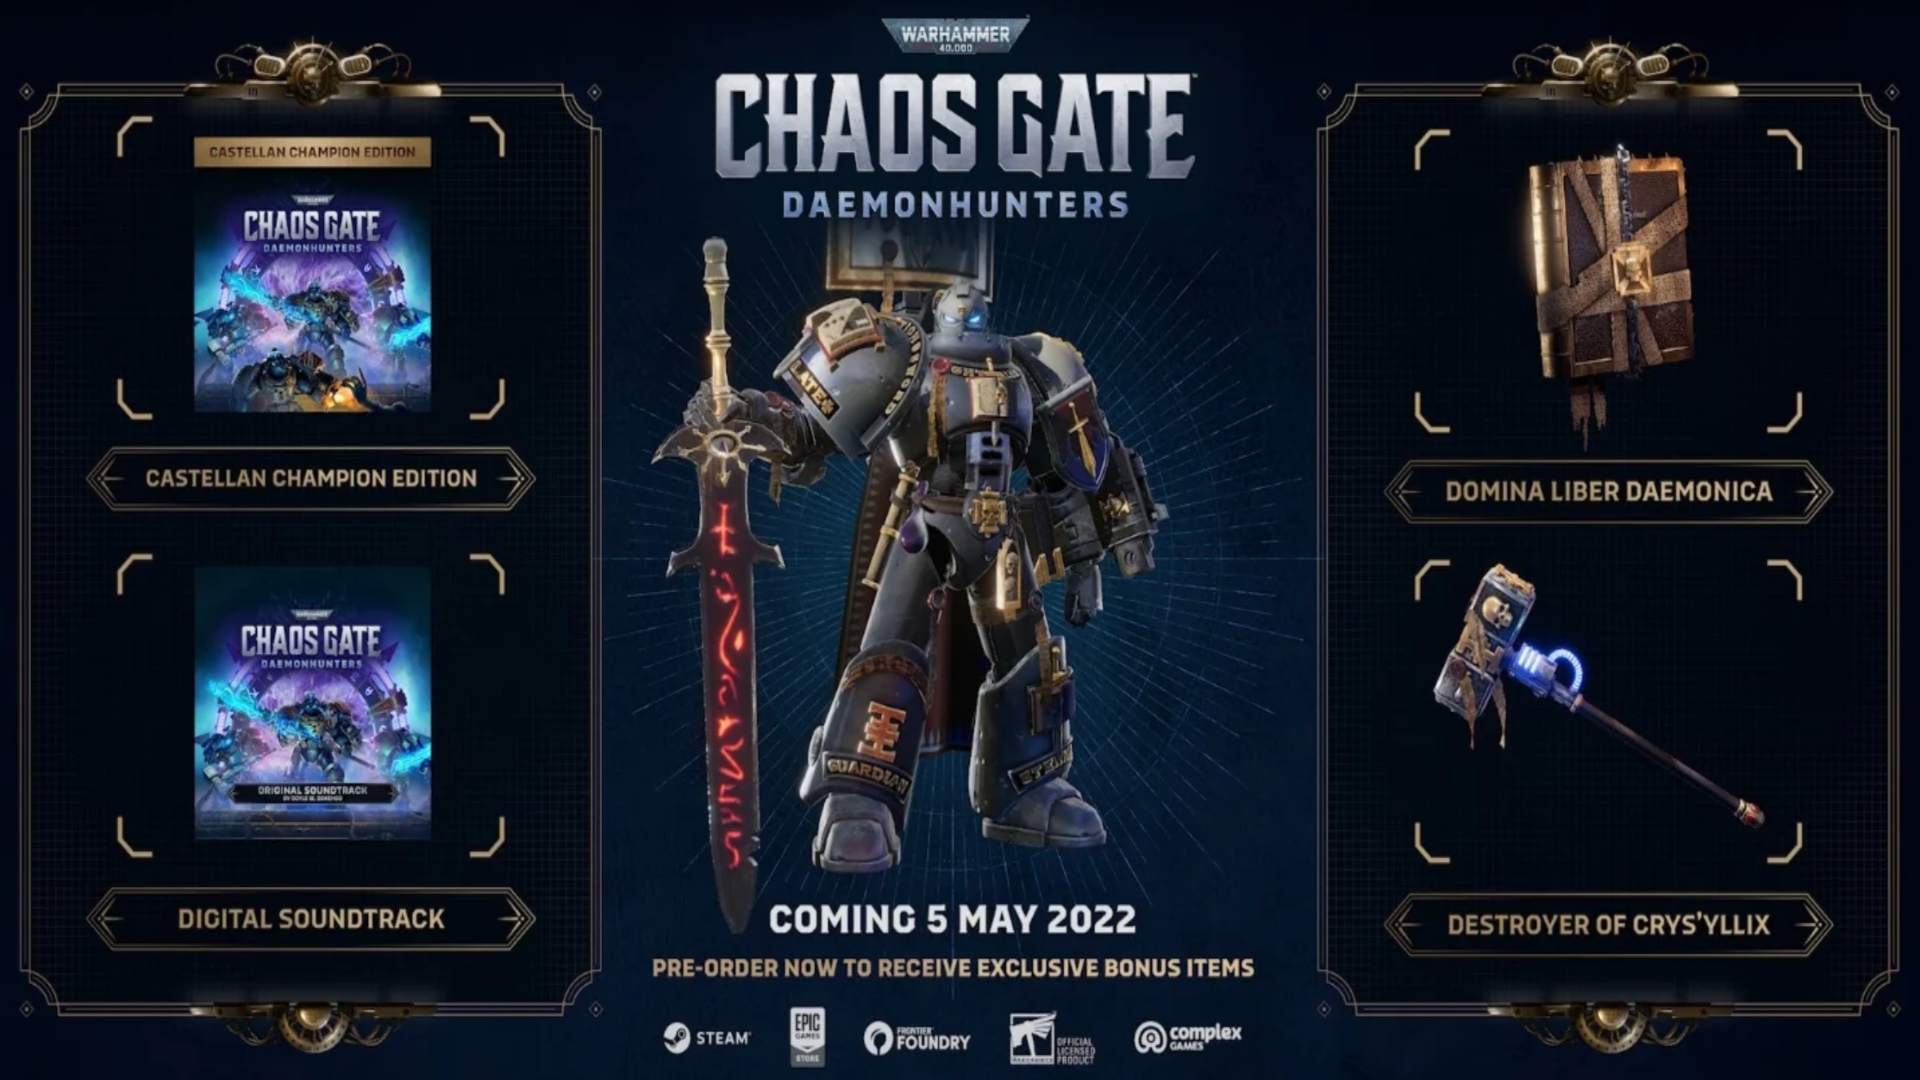 Warhammer 40,000: Chaos Gate - Daemonhunters - Grandmaster Vardan Kai is  pleased to report that your Justicars have purged over 55 million enemies  of the Imperium, since launch. This proves that your